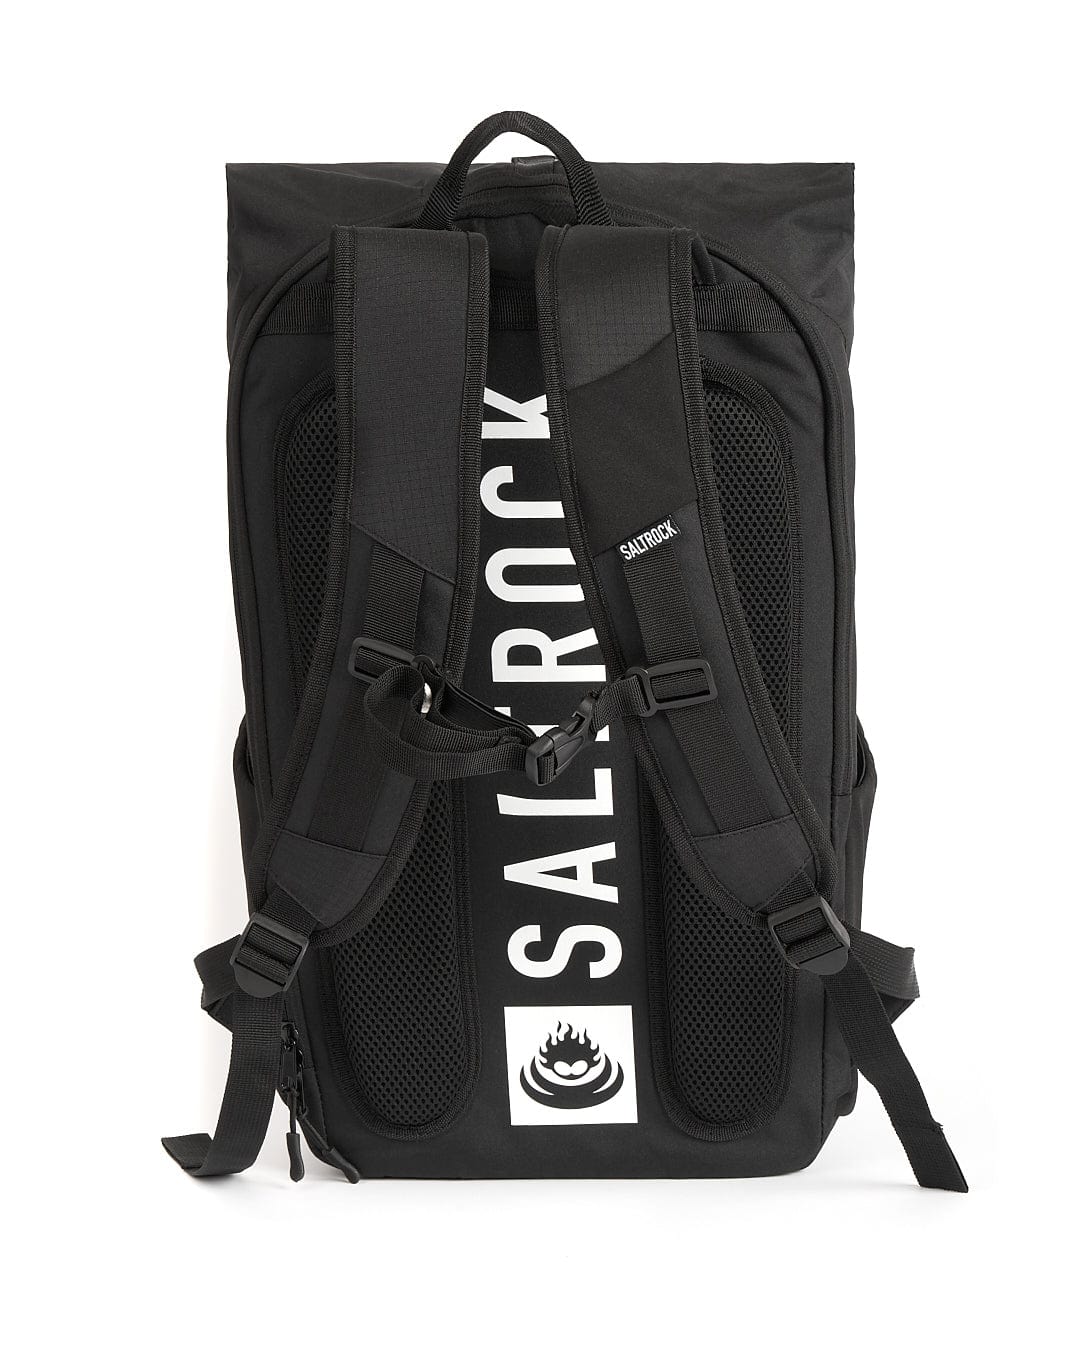 A black Streamline backpack with the brand name Saltrock on it.